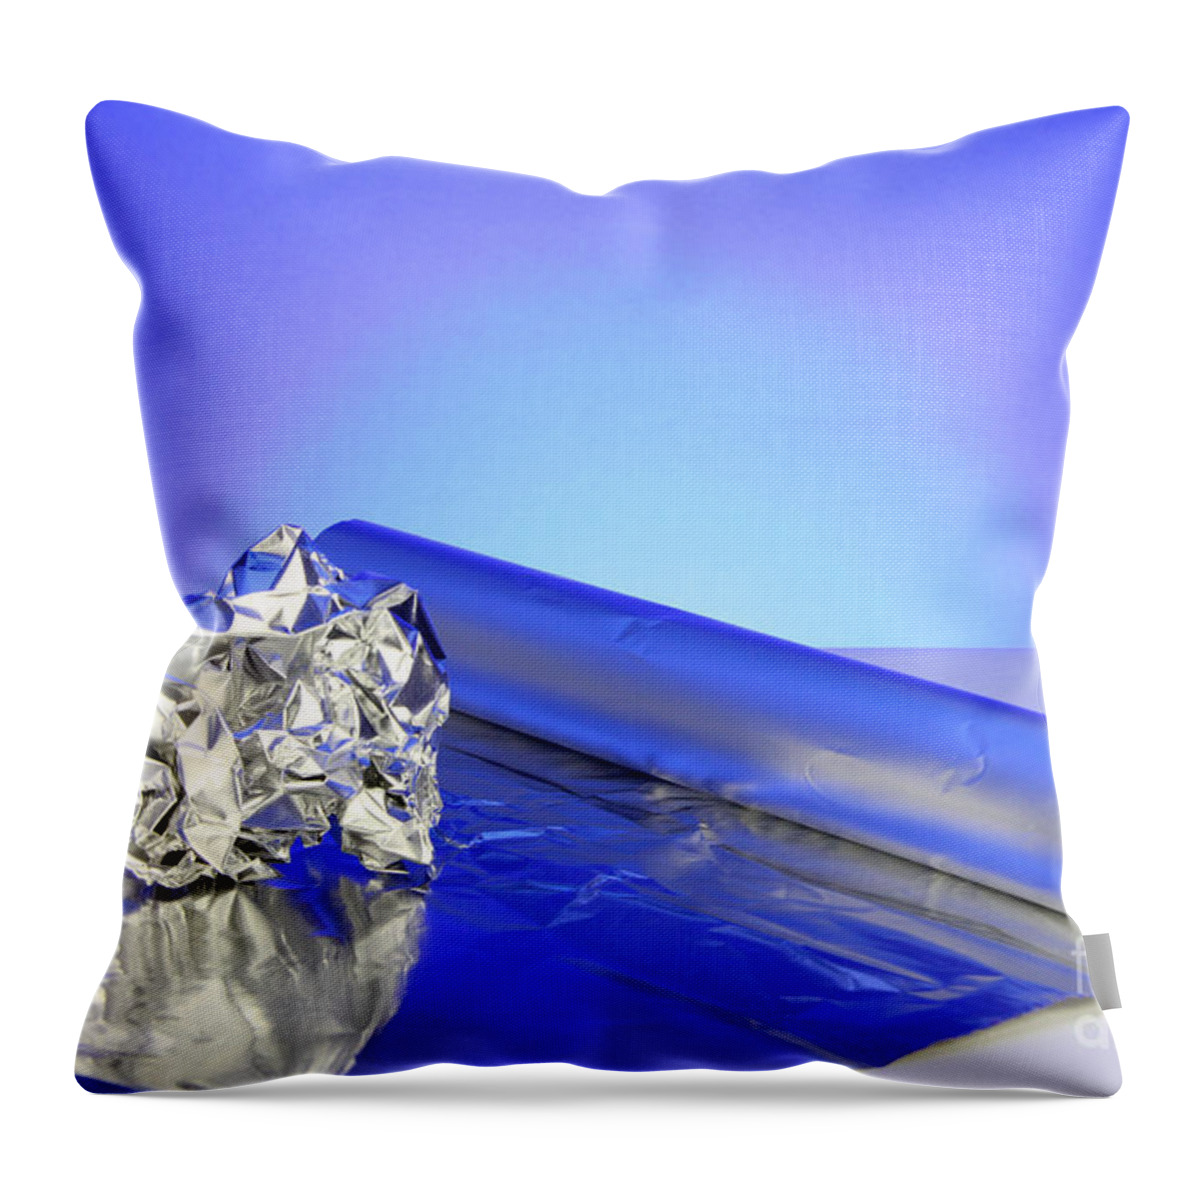 Aluminum Throw Pillow featuring the photograph Aluminum Foil by Photo Researchers, Inc.